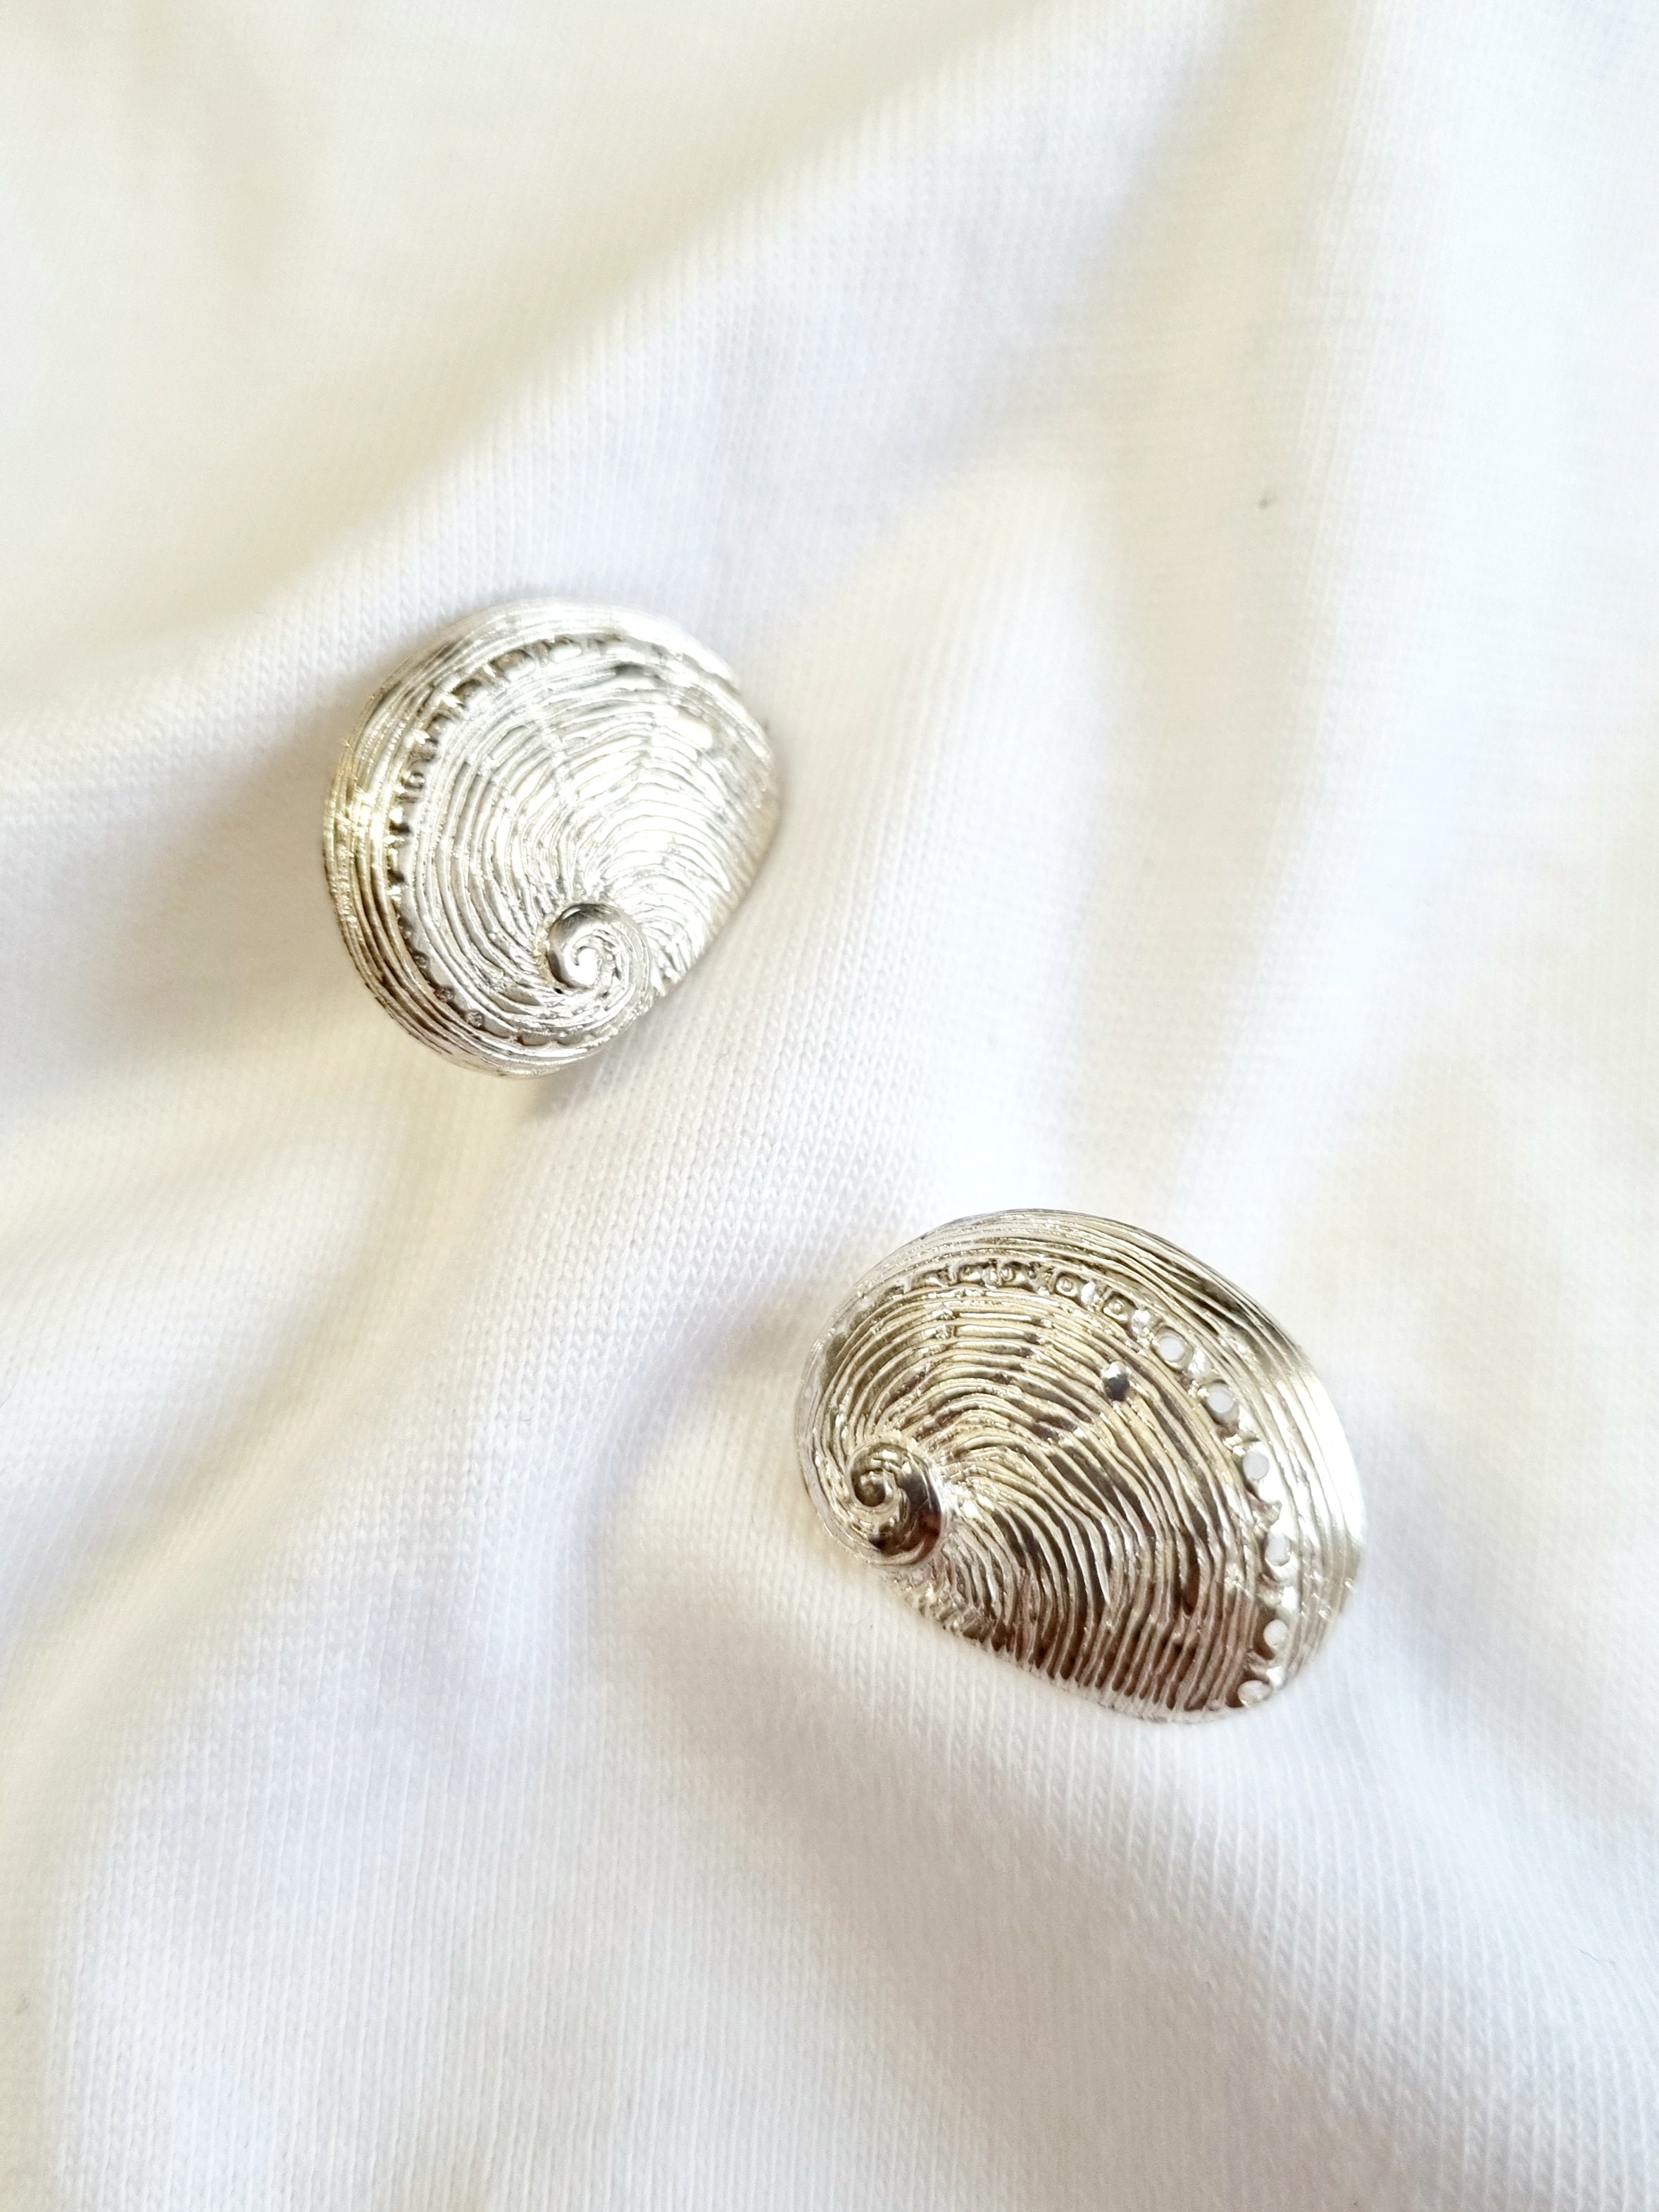 Tasmania Coastal Collection - Silver and Gold Earrings Earrings The rare and Beautiful Abalone Stud (15mm) 